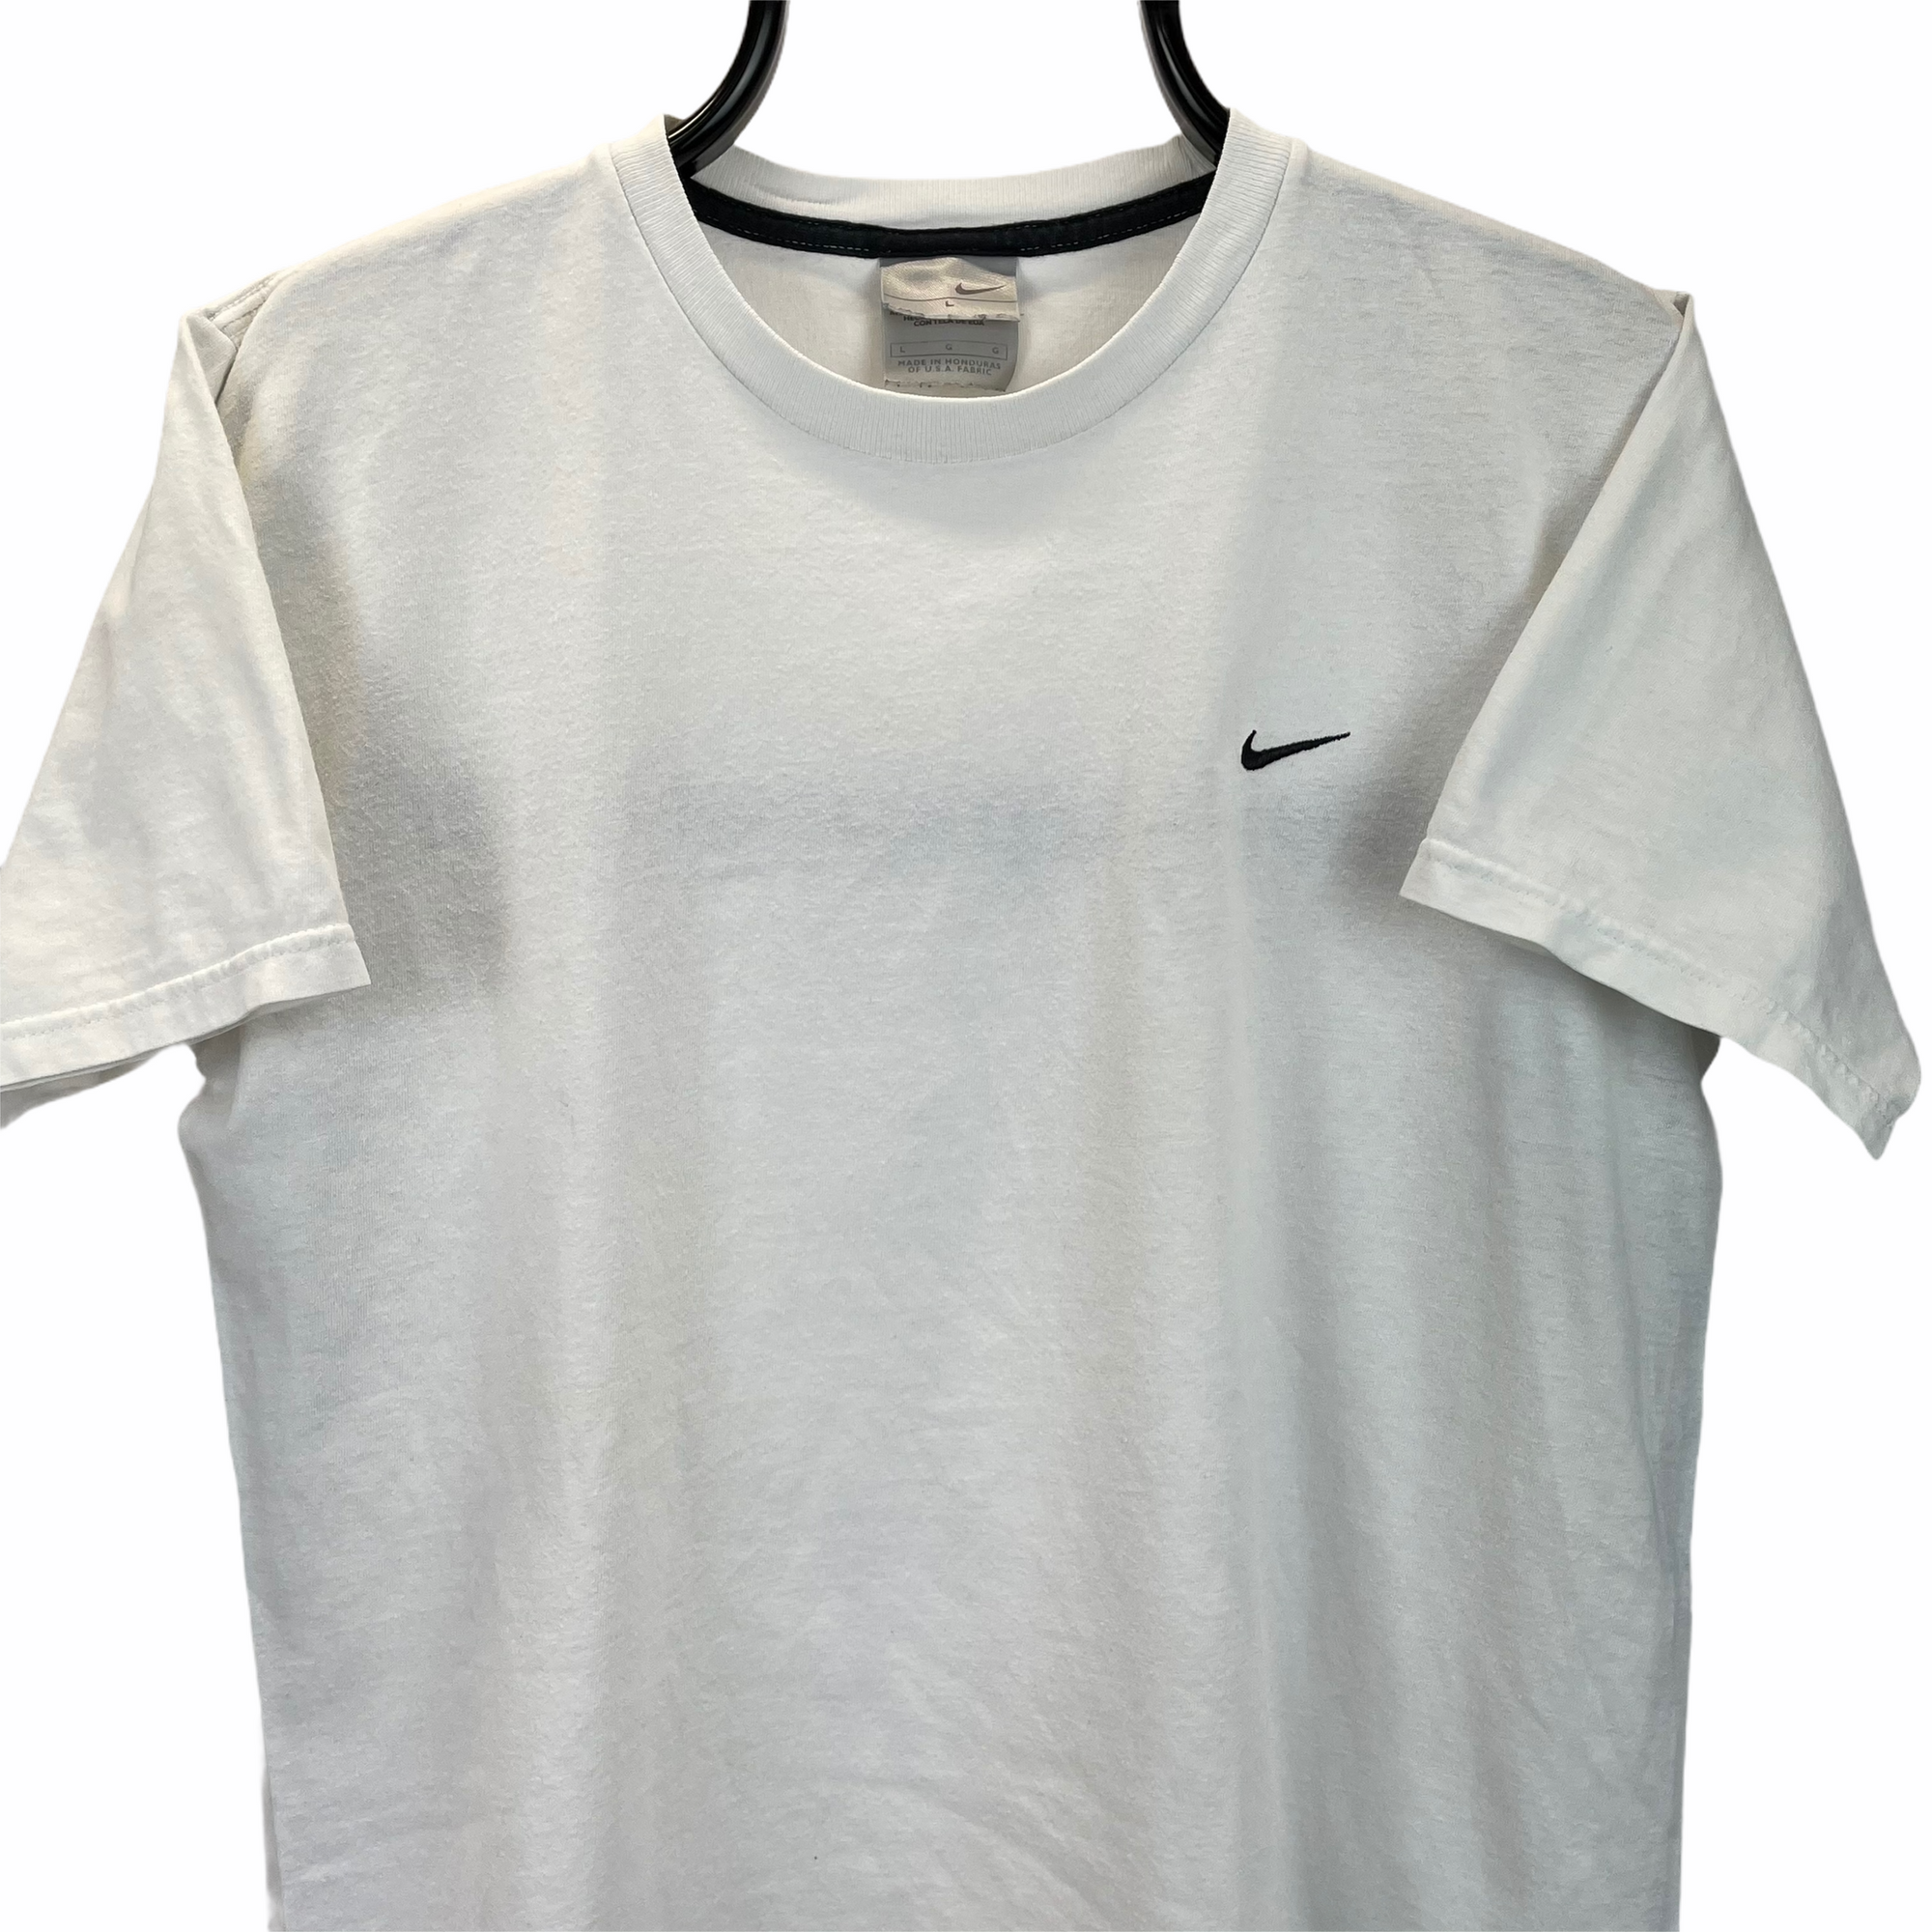 Vintage 90s Nike Embroidered Small Swoosh Tee in White - Men's Medium/Women's Large